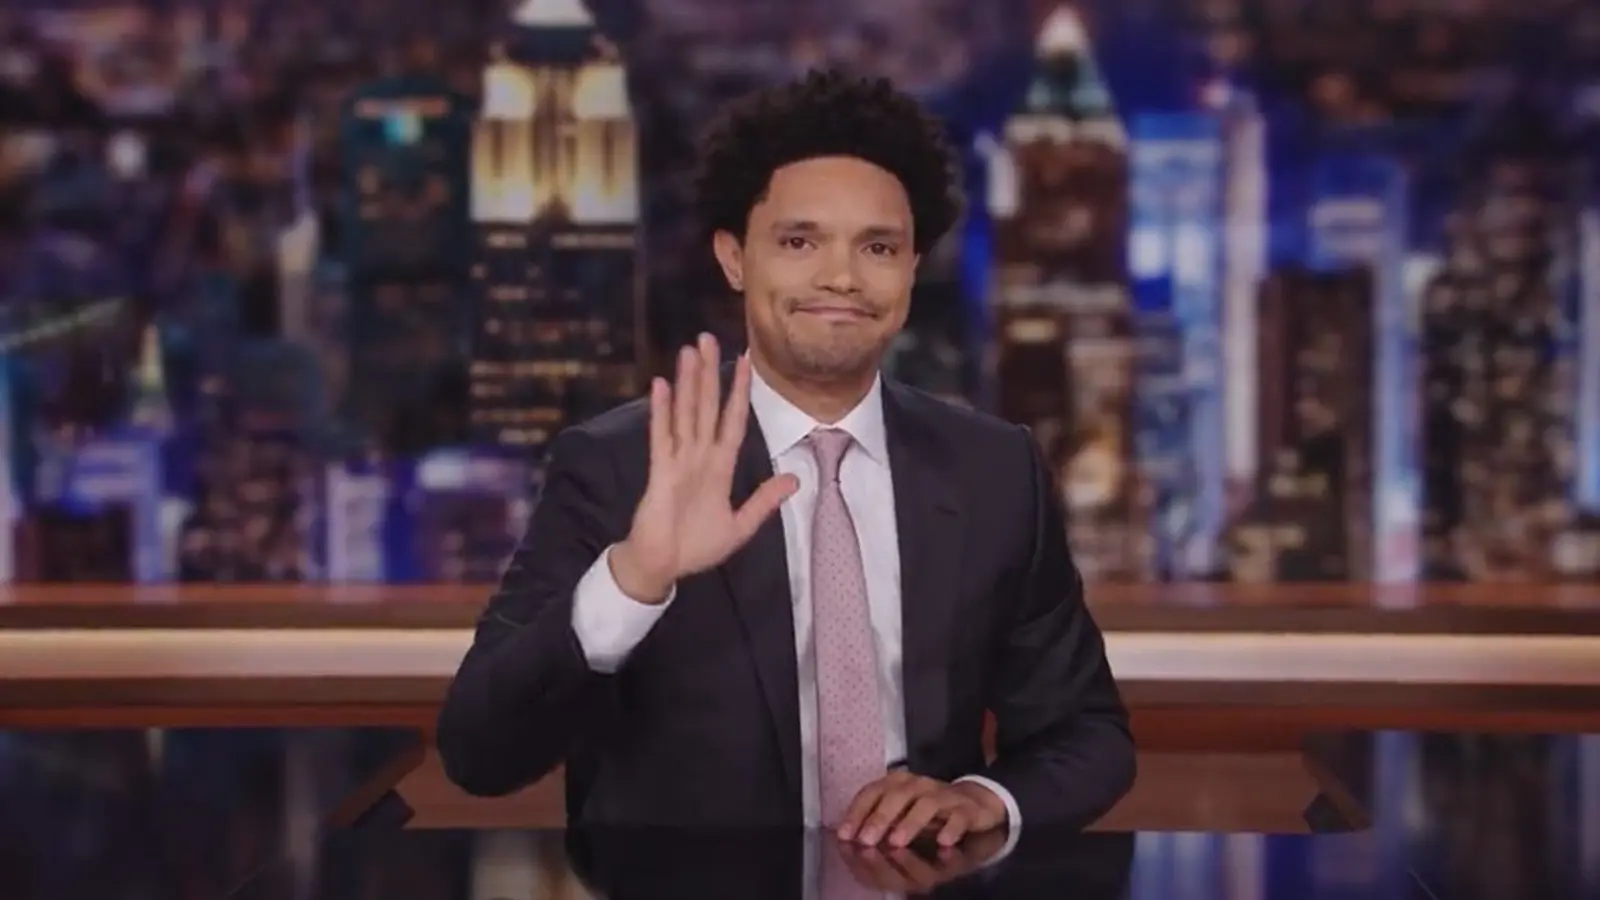 Trevor Noah had a final heart-to-heart conversation with his audience.